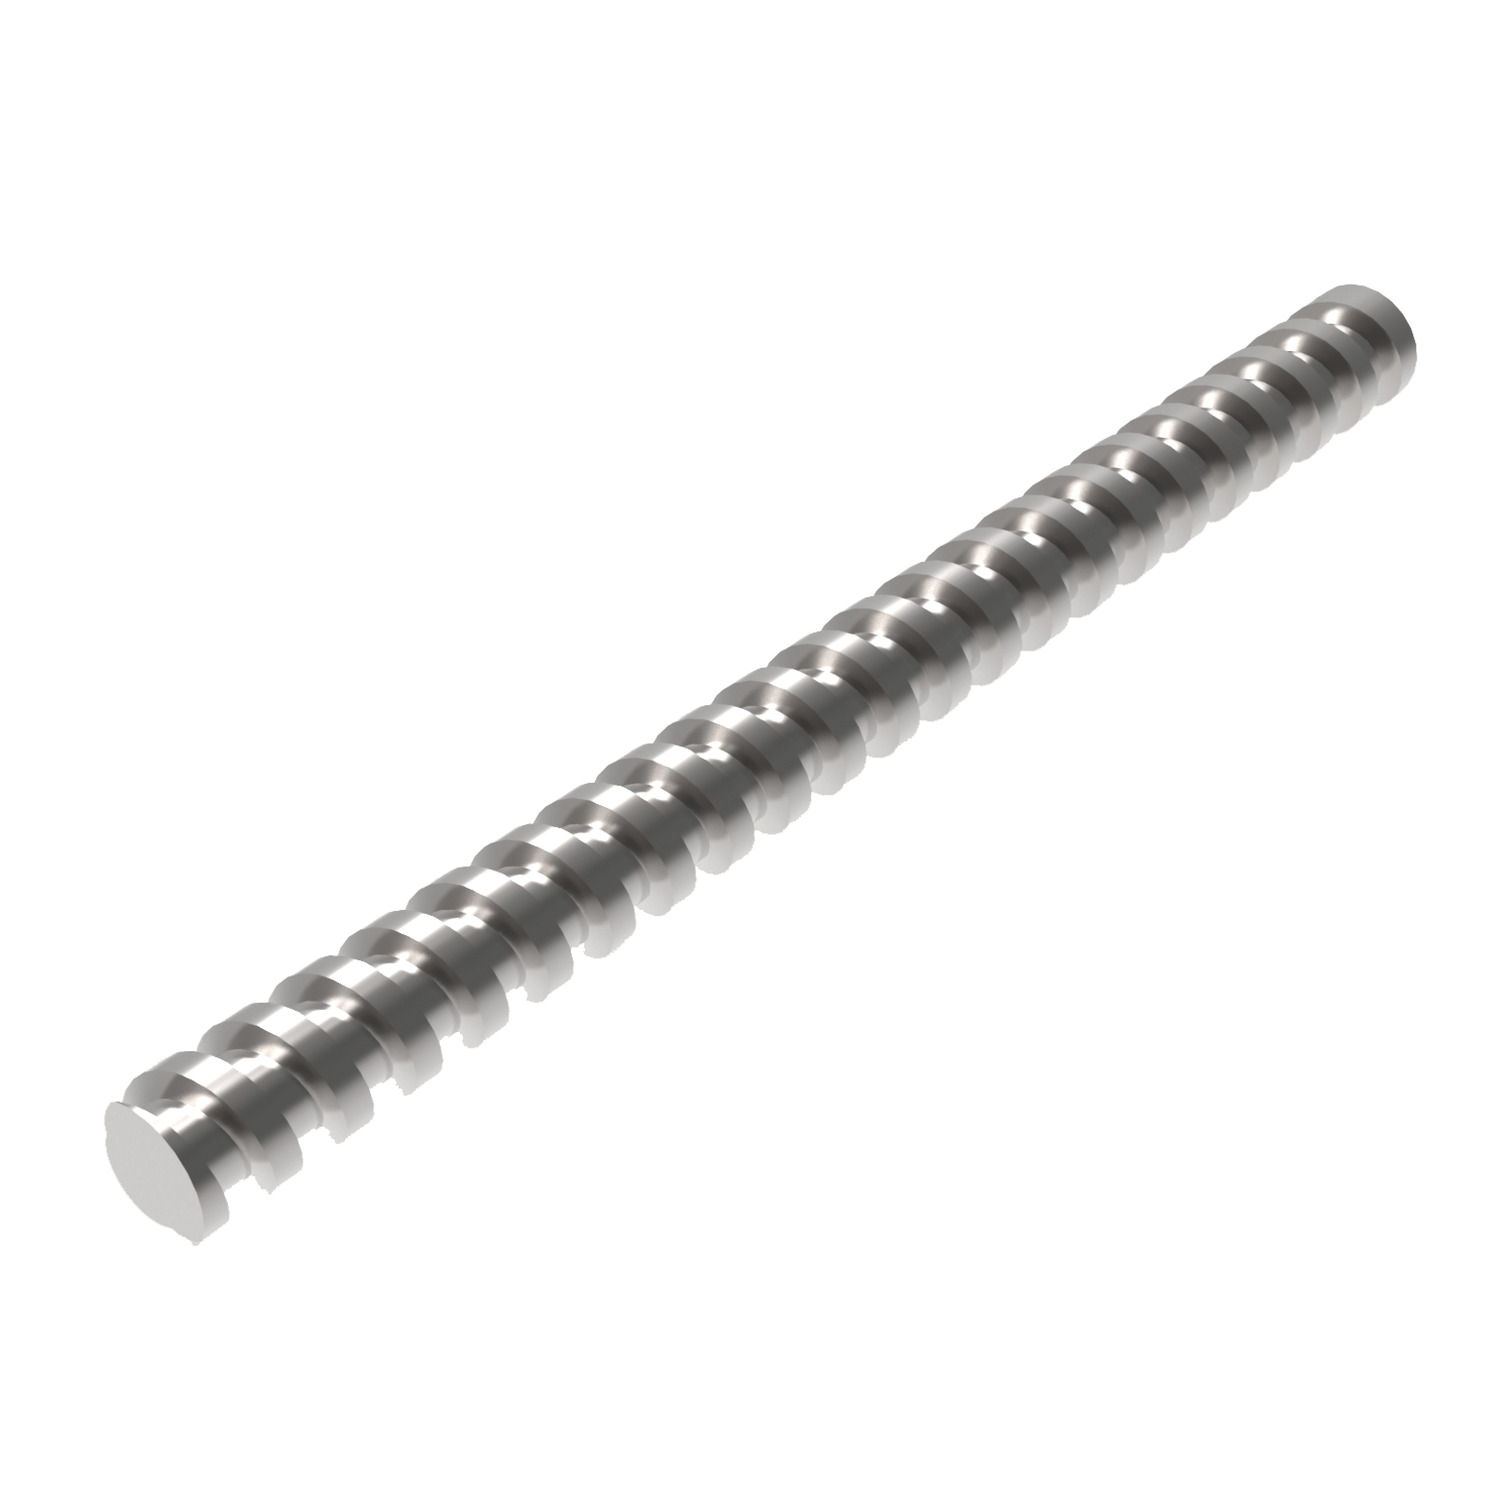 Miniature Rolled Ball Screws & Nuts Miniature ball screws with small (6 to 14mm) diameter. Chrome plated steel for corrosion resistance - safe for use in food industry.